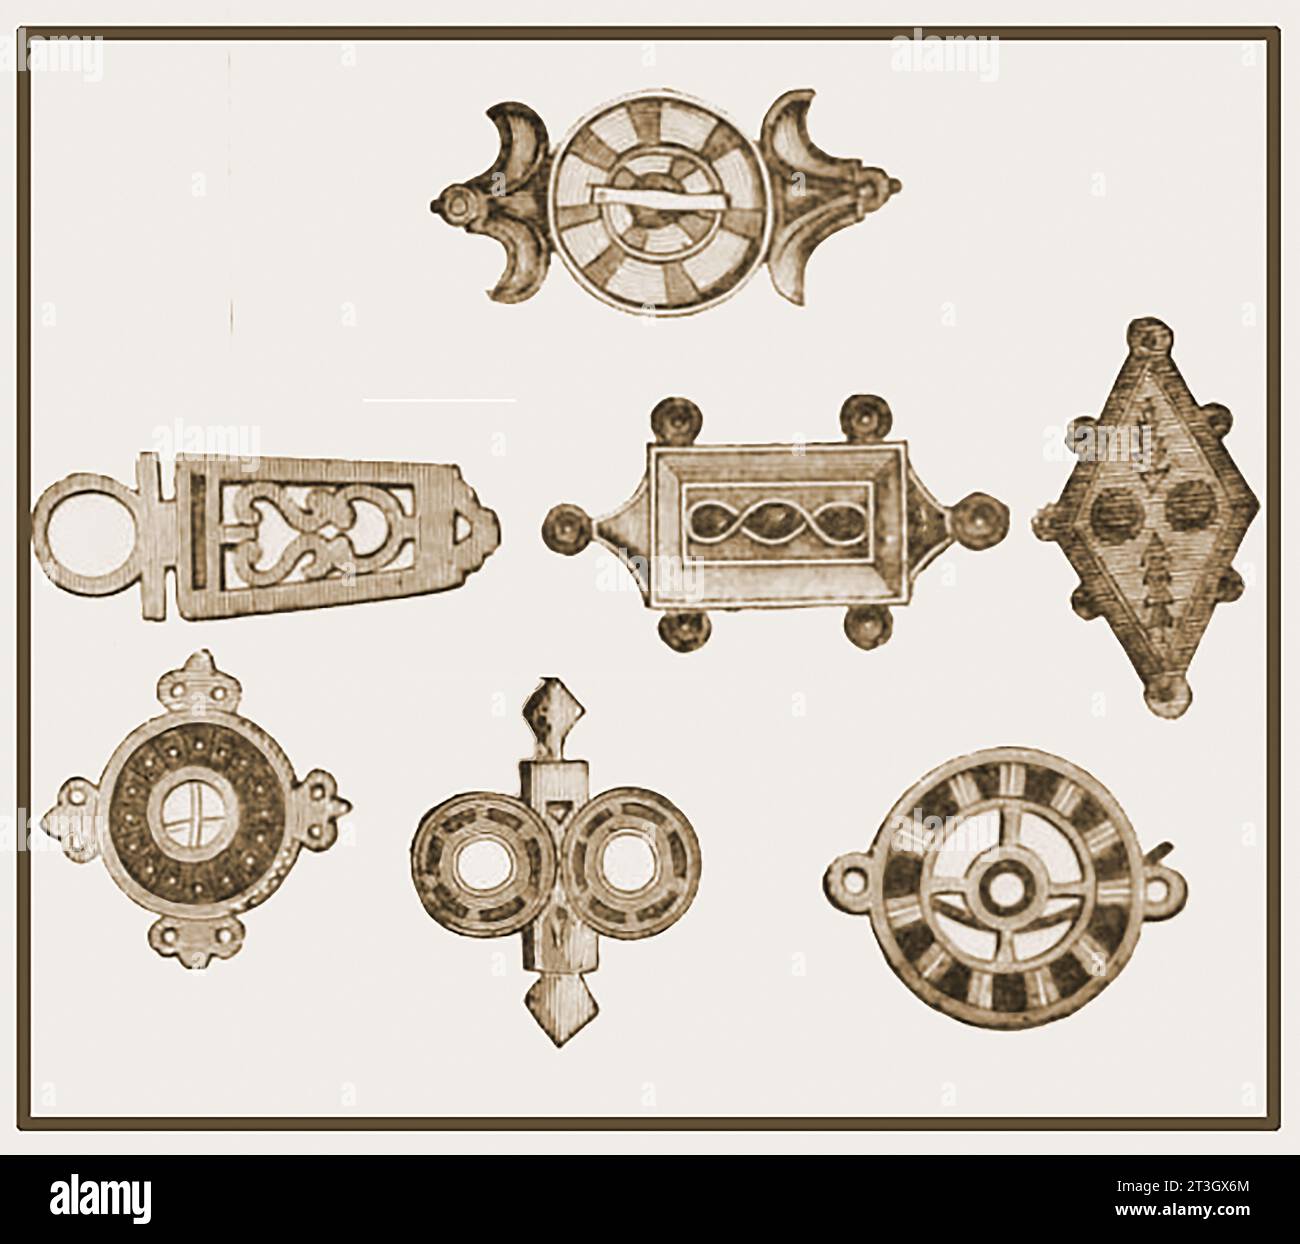 FIBULA - BROOCH - A 19th century engraving of archaeological finds from Anglo Saxon and Irish sites. Stock Photo